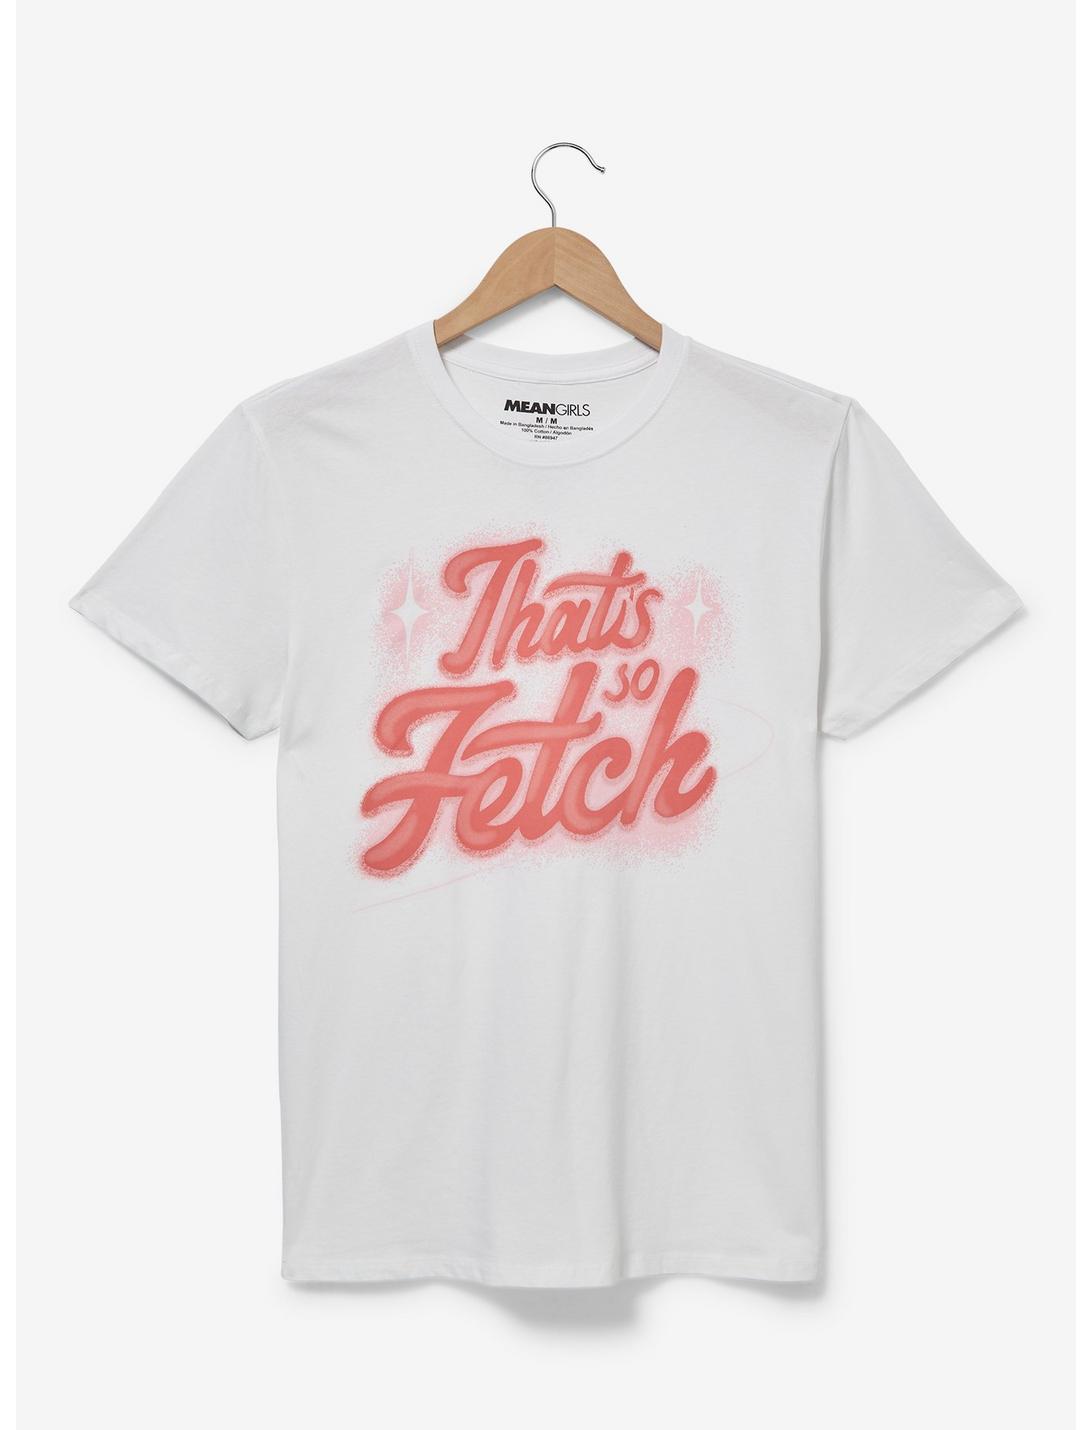 Mean Girls That's So Fetch Airbrush Women's T-Shirt - BoxLunch Exclusive, , hi-res